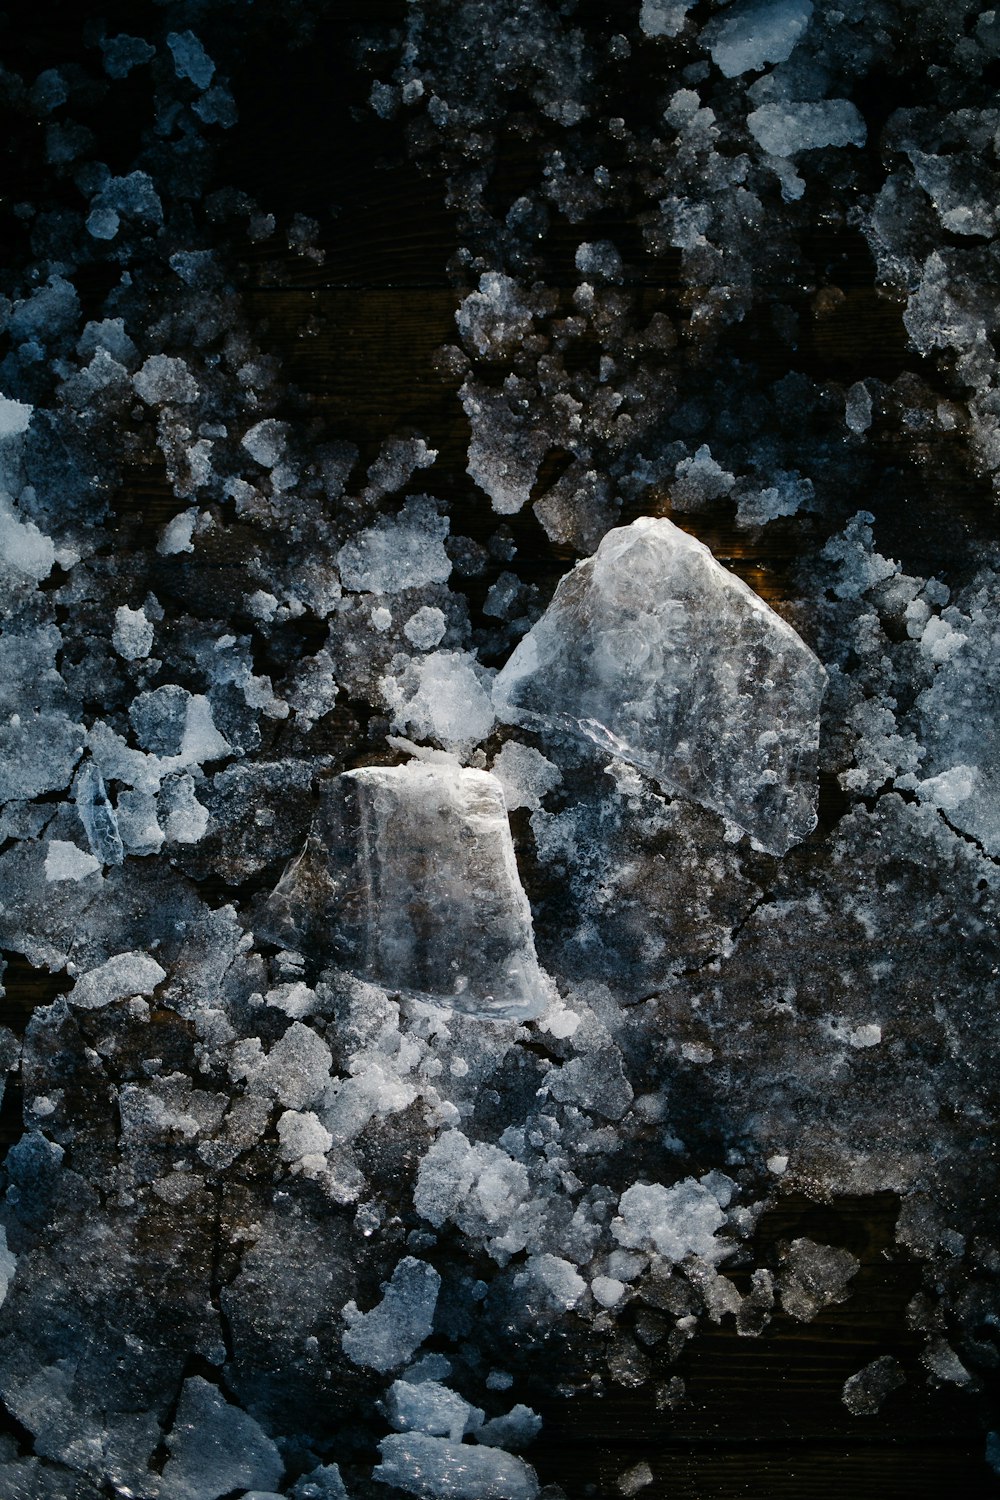 gray and white stone fragments